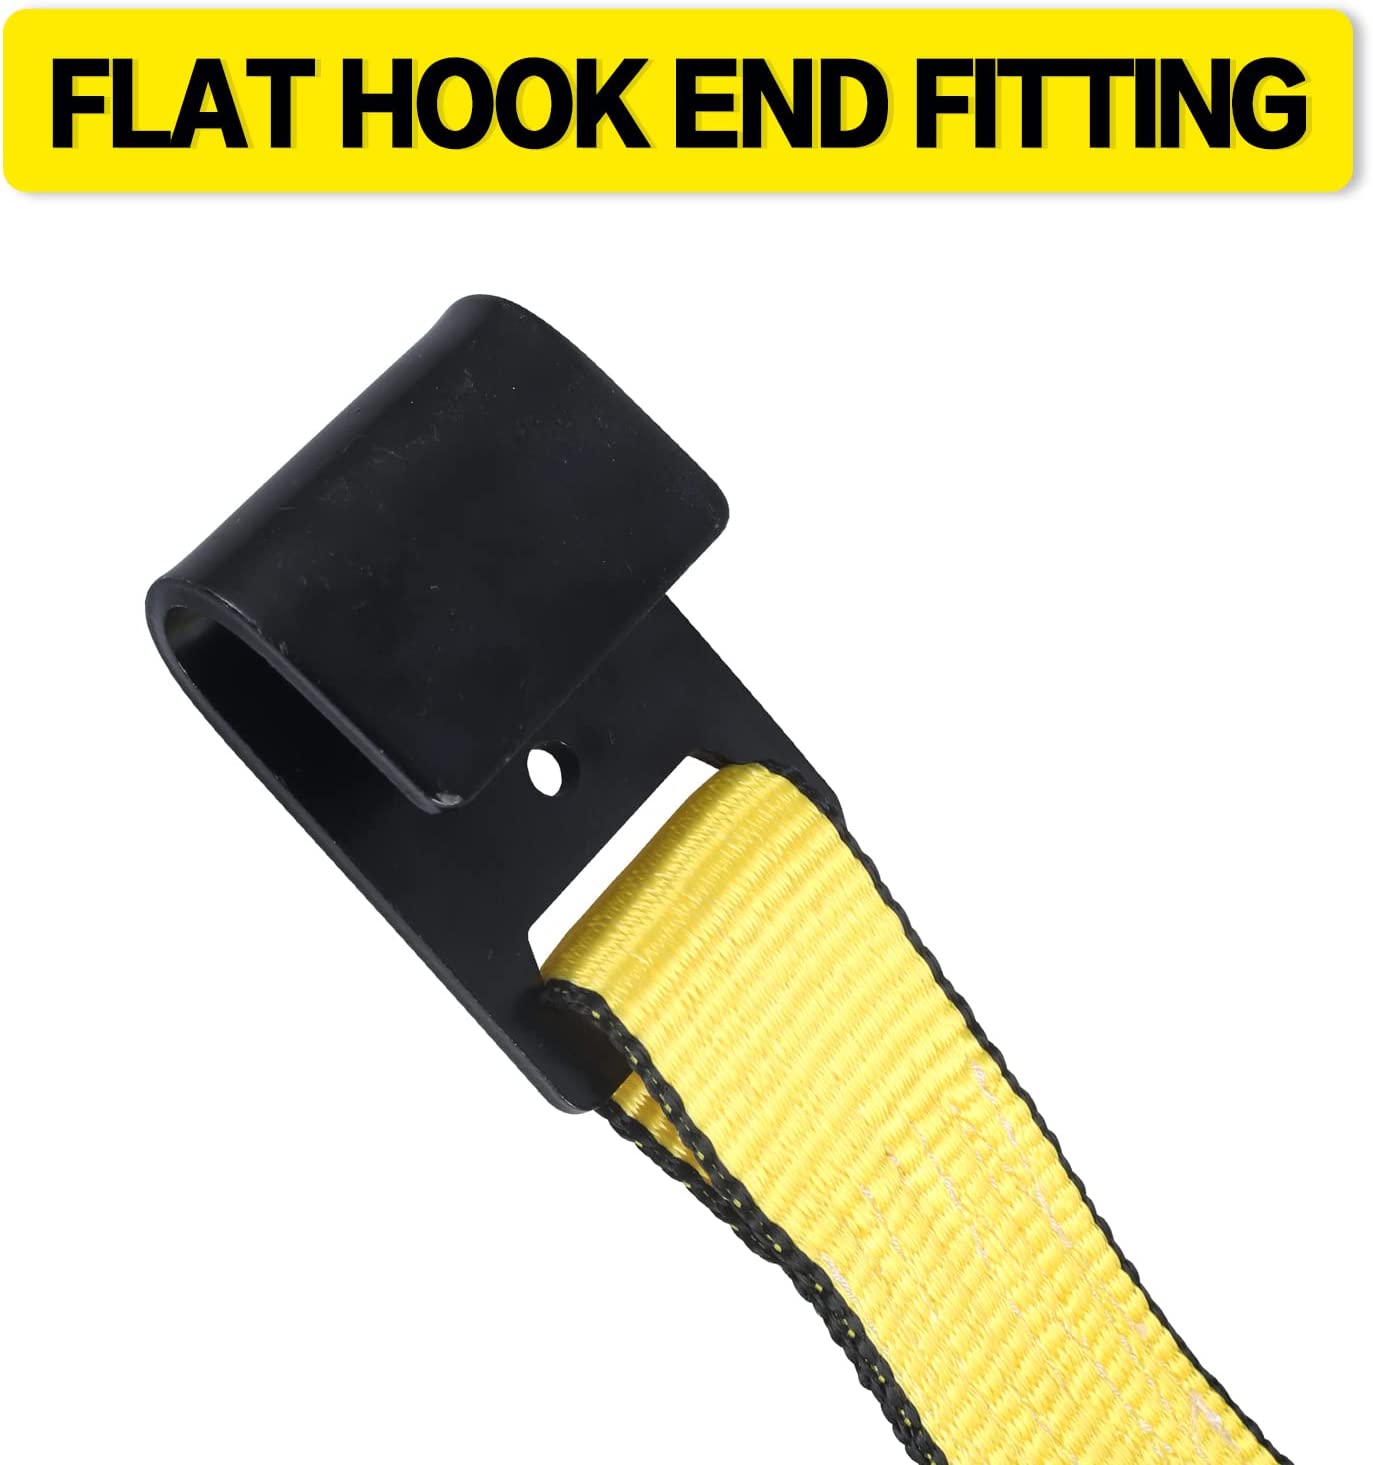 Autofonder 2 Ratchet Strap with Flat Hook For Flatbed, Truck, Trailer